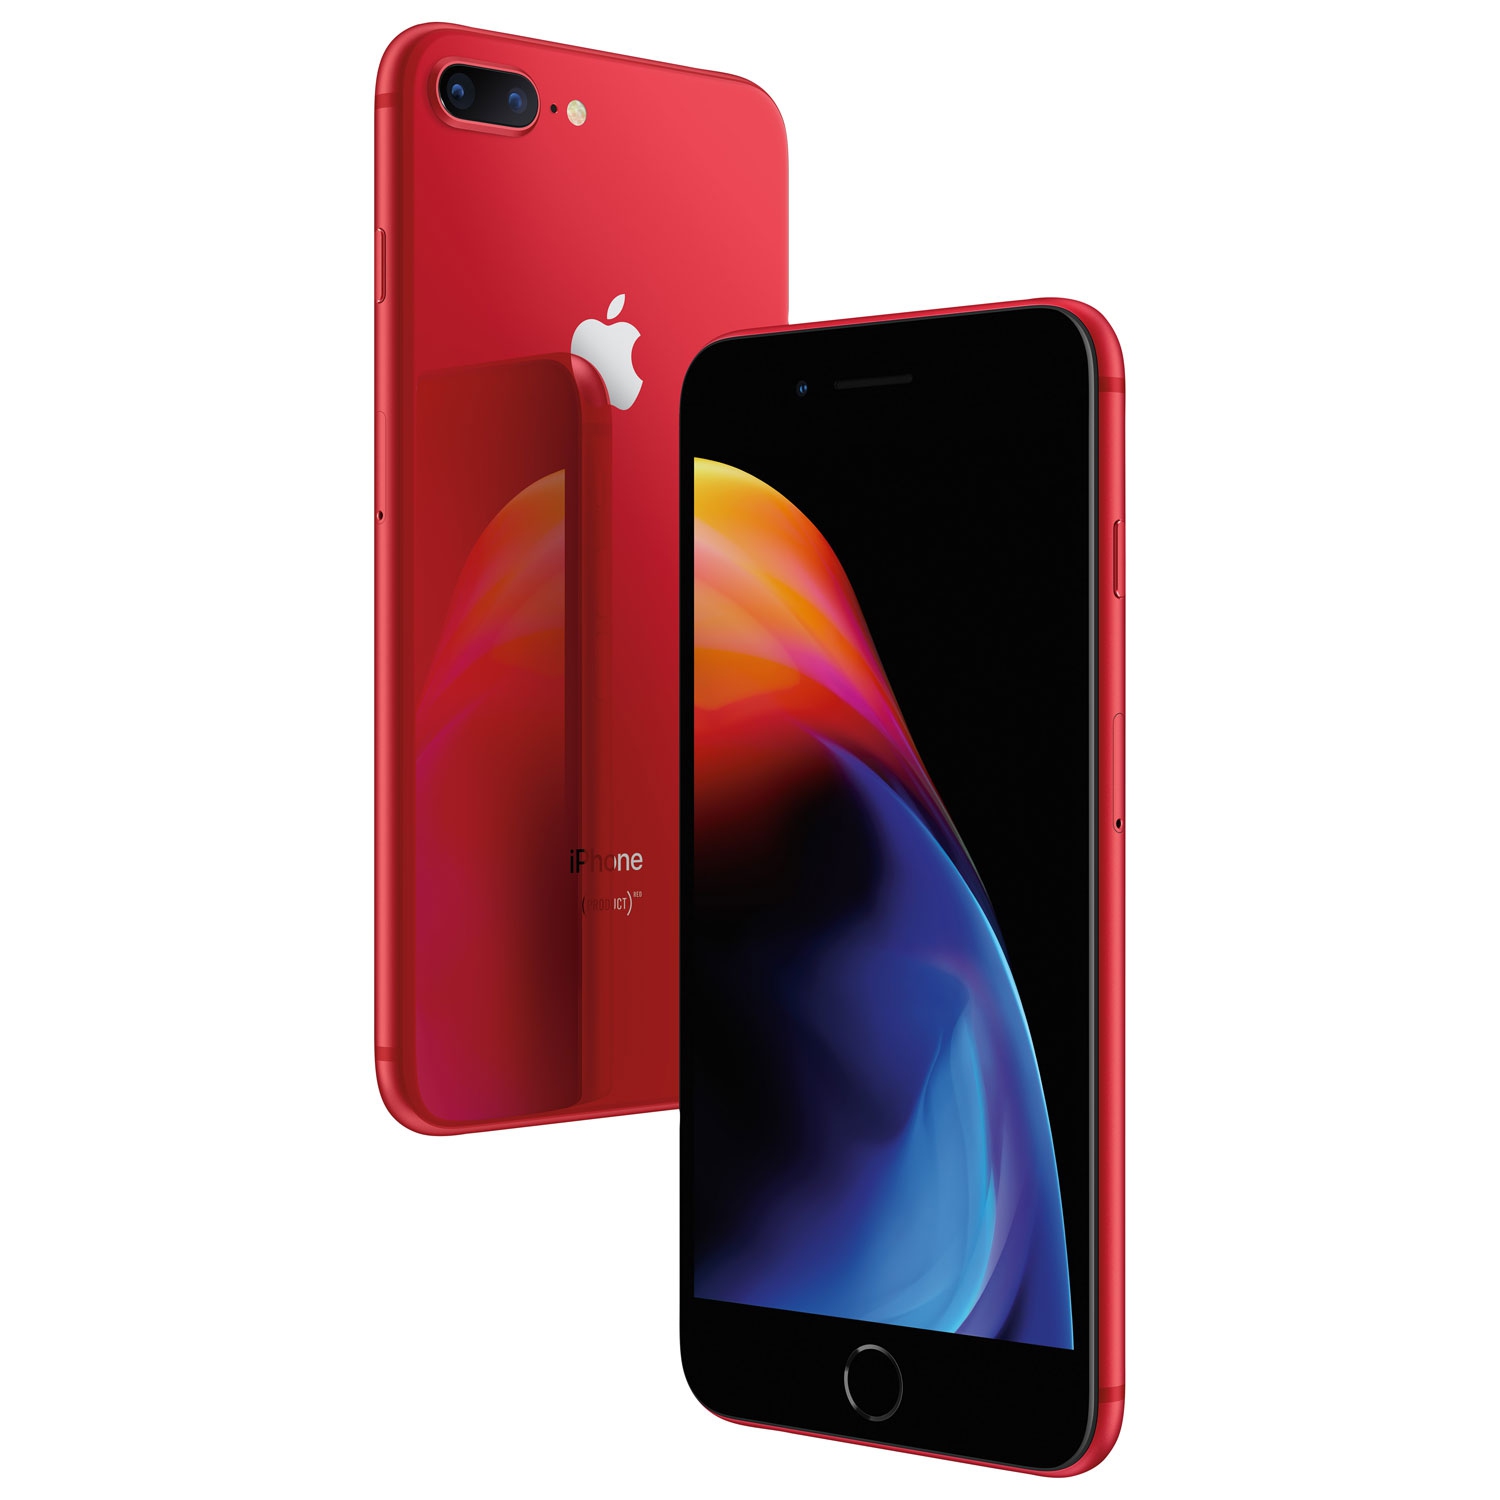 Refurbished (Excellent) - Apple iPhone 8 Plus 64GB Smartphone - (Product)RED - Unlocked - Certified Refurbished